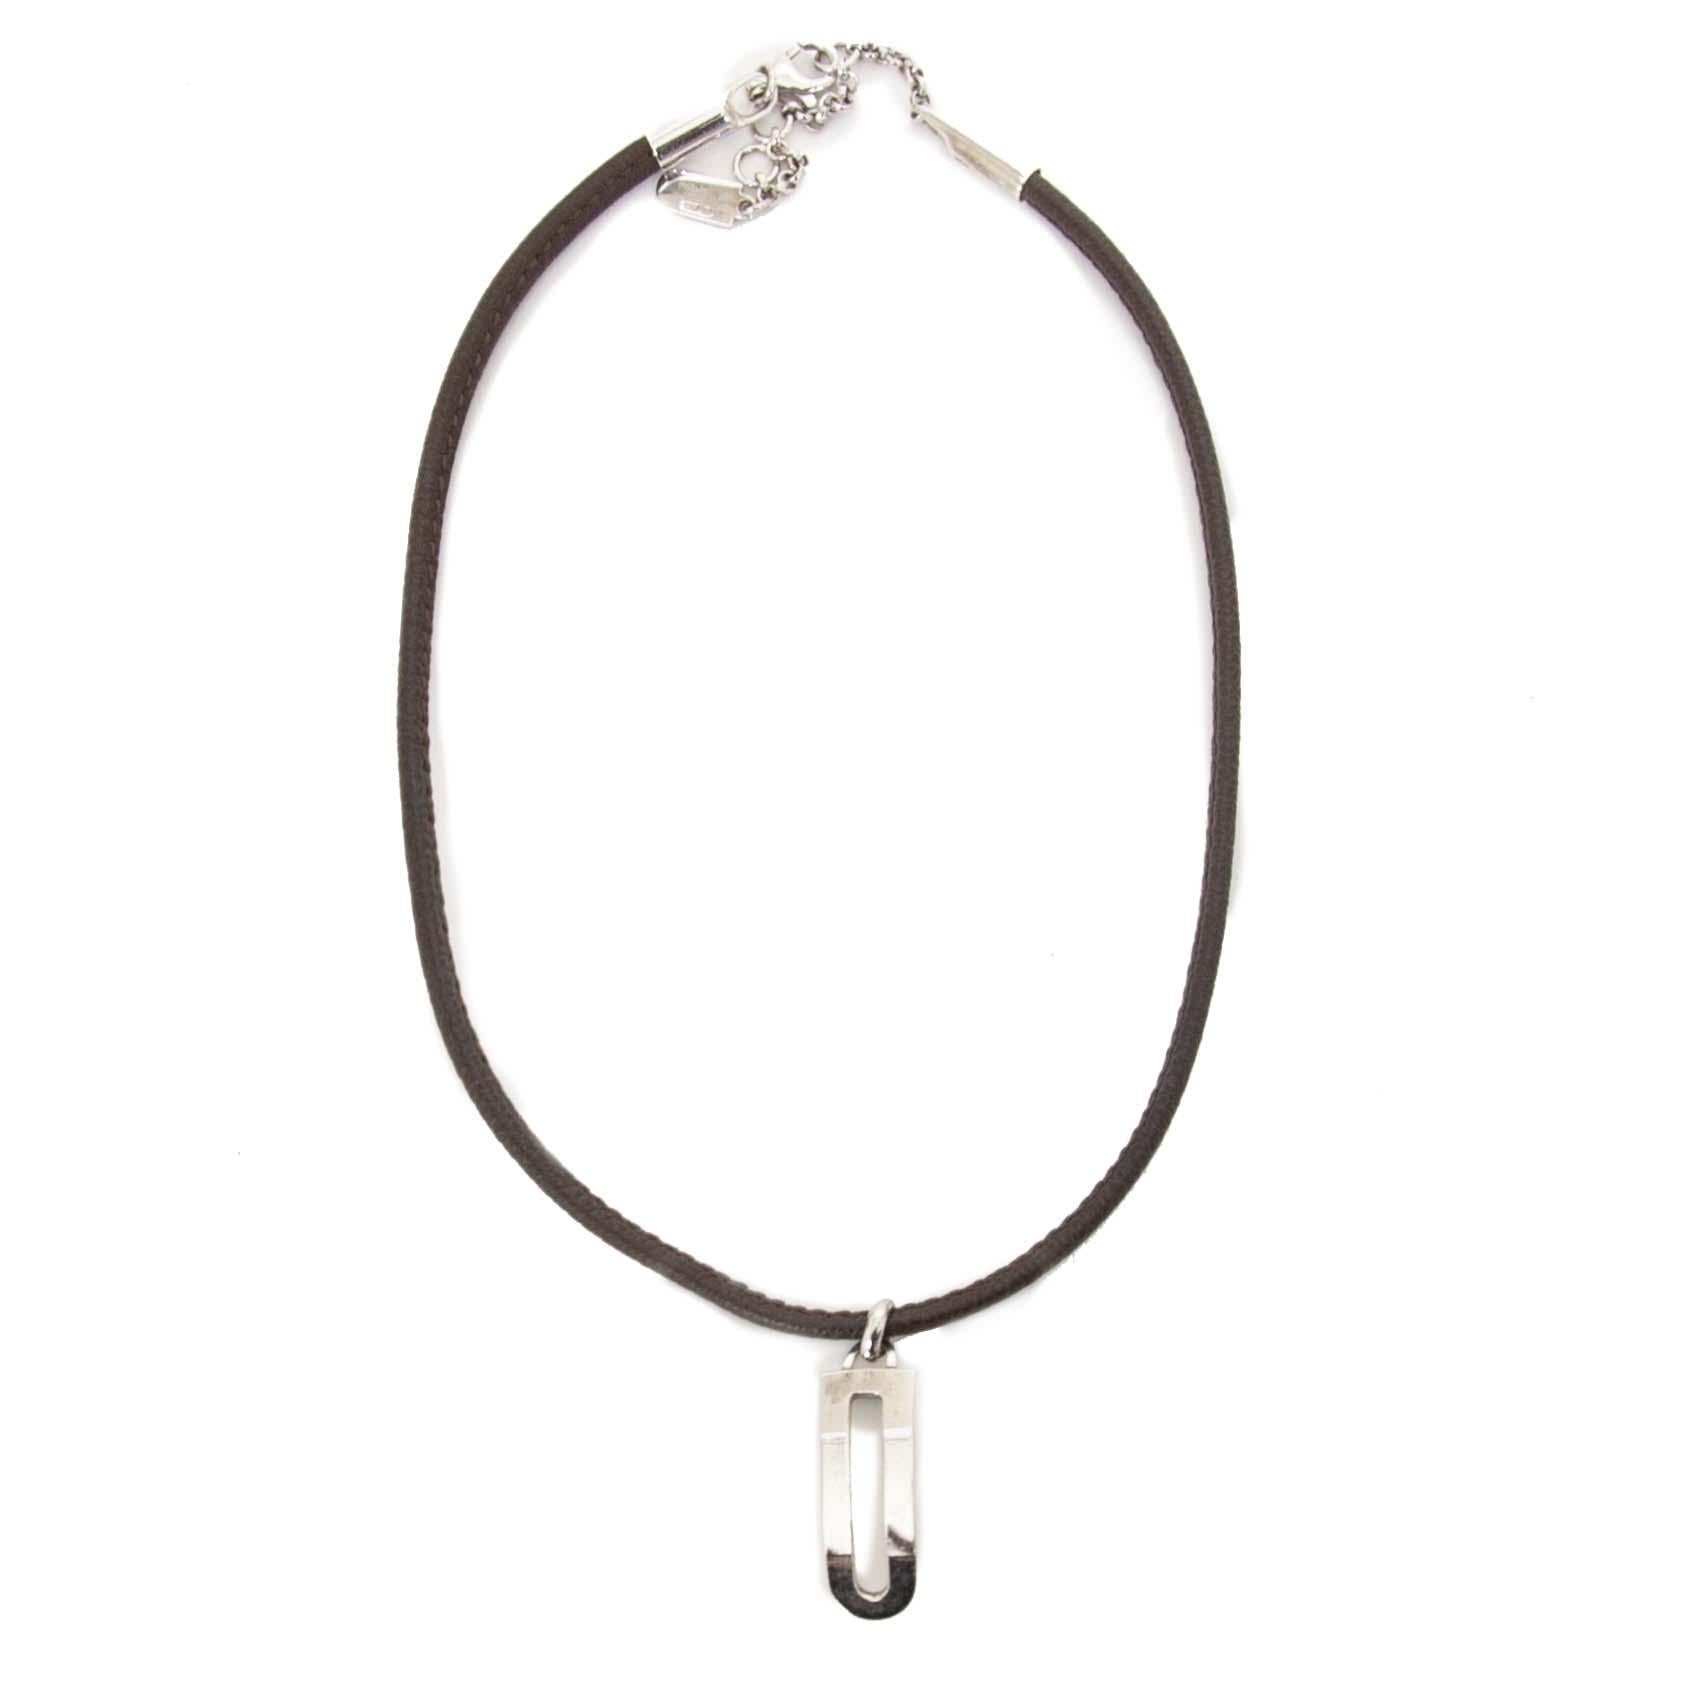 Good condition

Delvaux Brown Leather Silver D Necklace

This gorgeous necklace features a brown leather strap with a silver-toned 'D' hanger.
Add a touch of class to every outfit with this beautiful necklace!